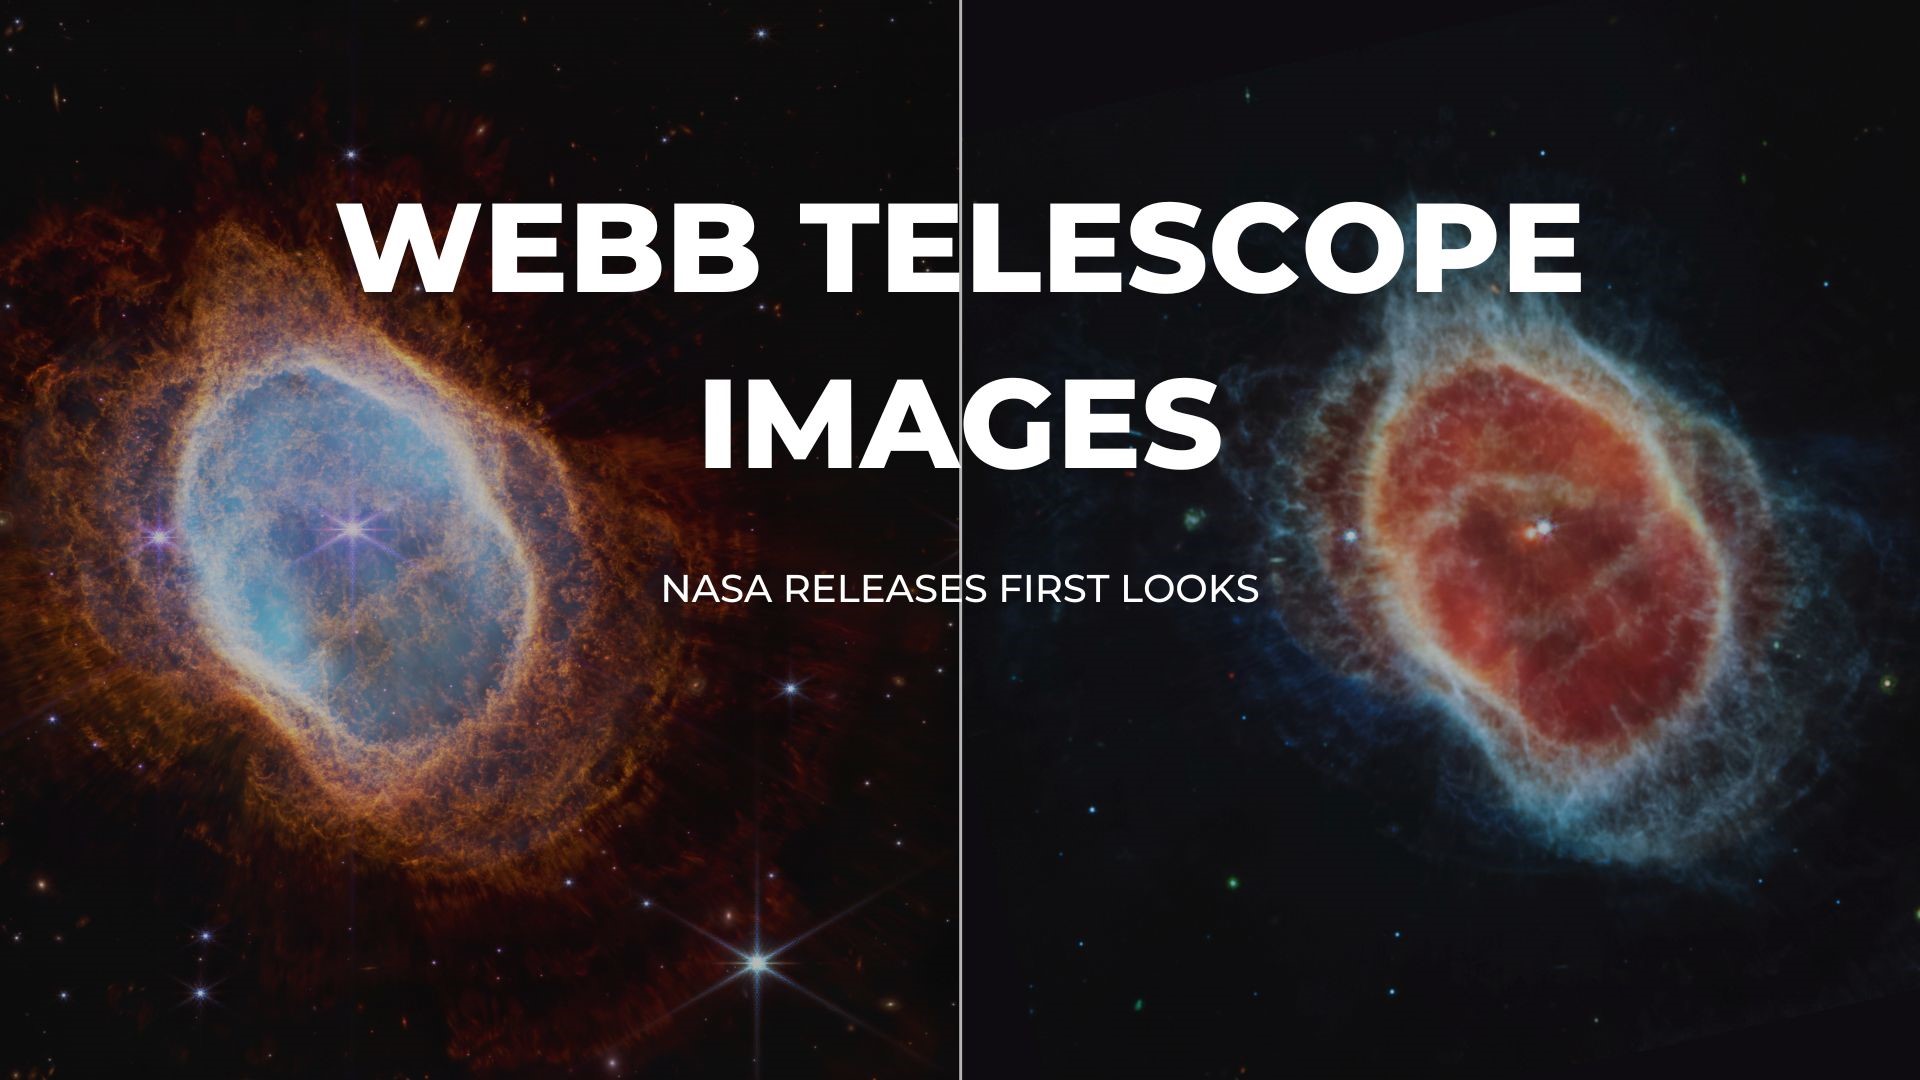 NASA's announcement of the first images from the Webb telescope. They reveal cosmic cliffs and a dying star's final 'performance.'